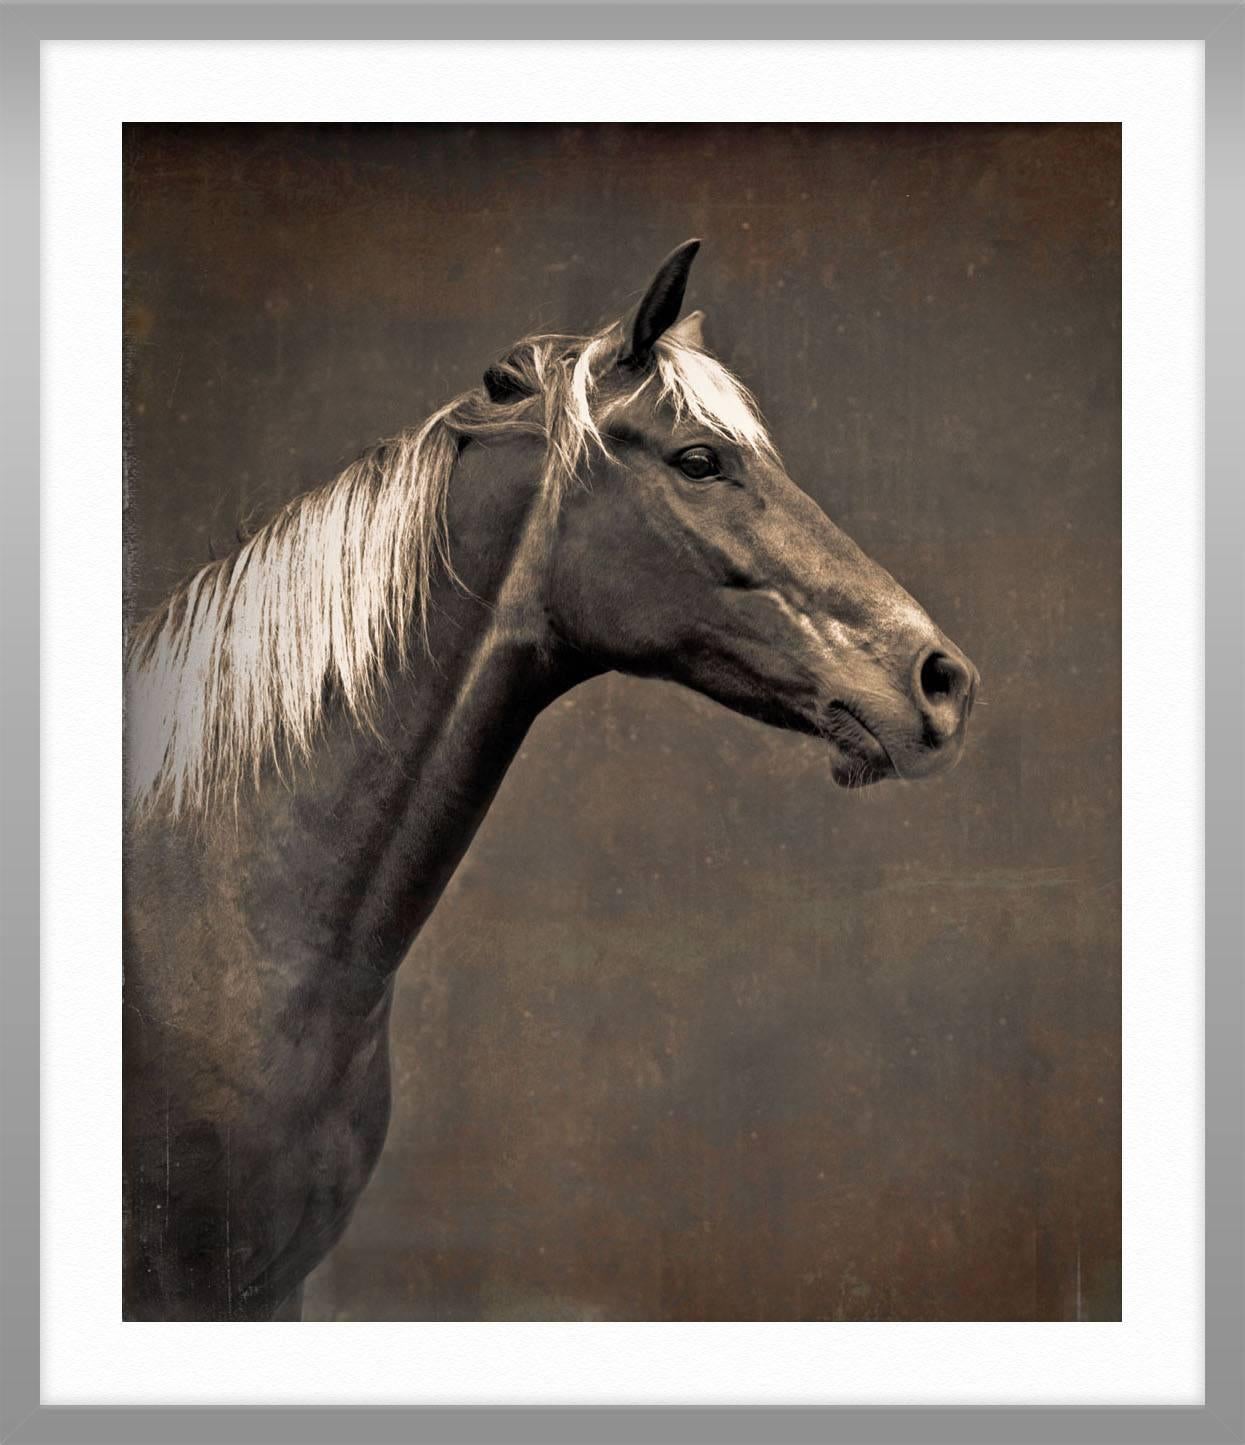 ABOUT THIS PIECE: “There is something in the idea of the horse that evokes what I feel we as humans have lost: our connection to spirit, sense of wildness, and our spontaneity. In the horse we see our sacred history and our passage through time.